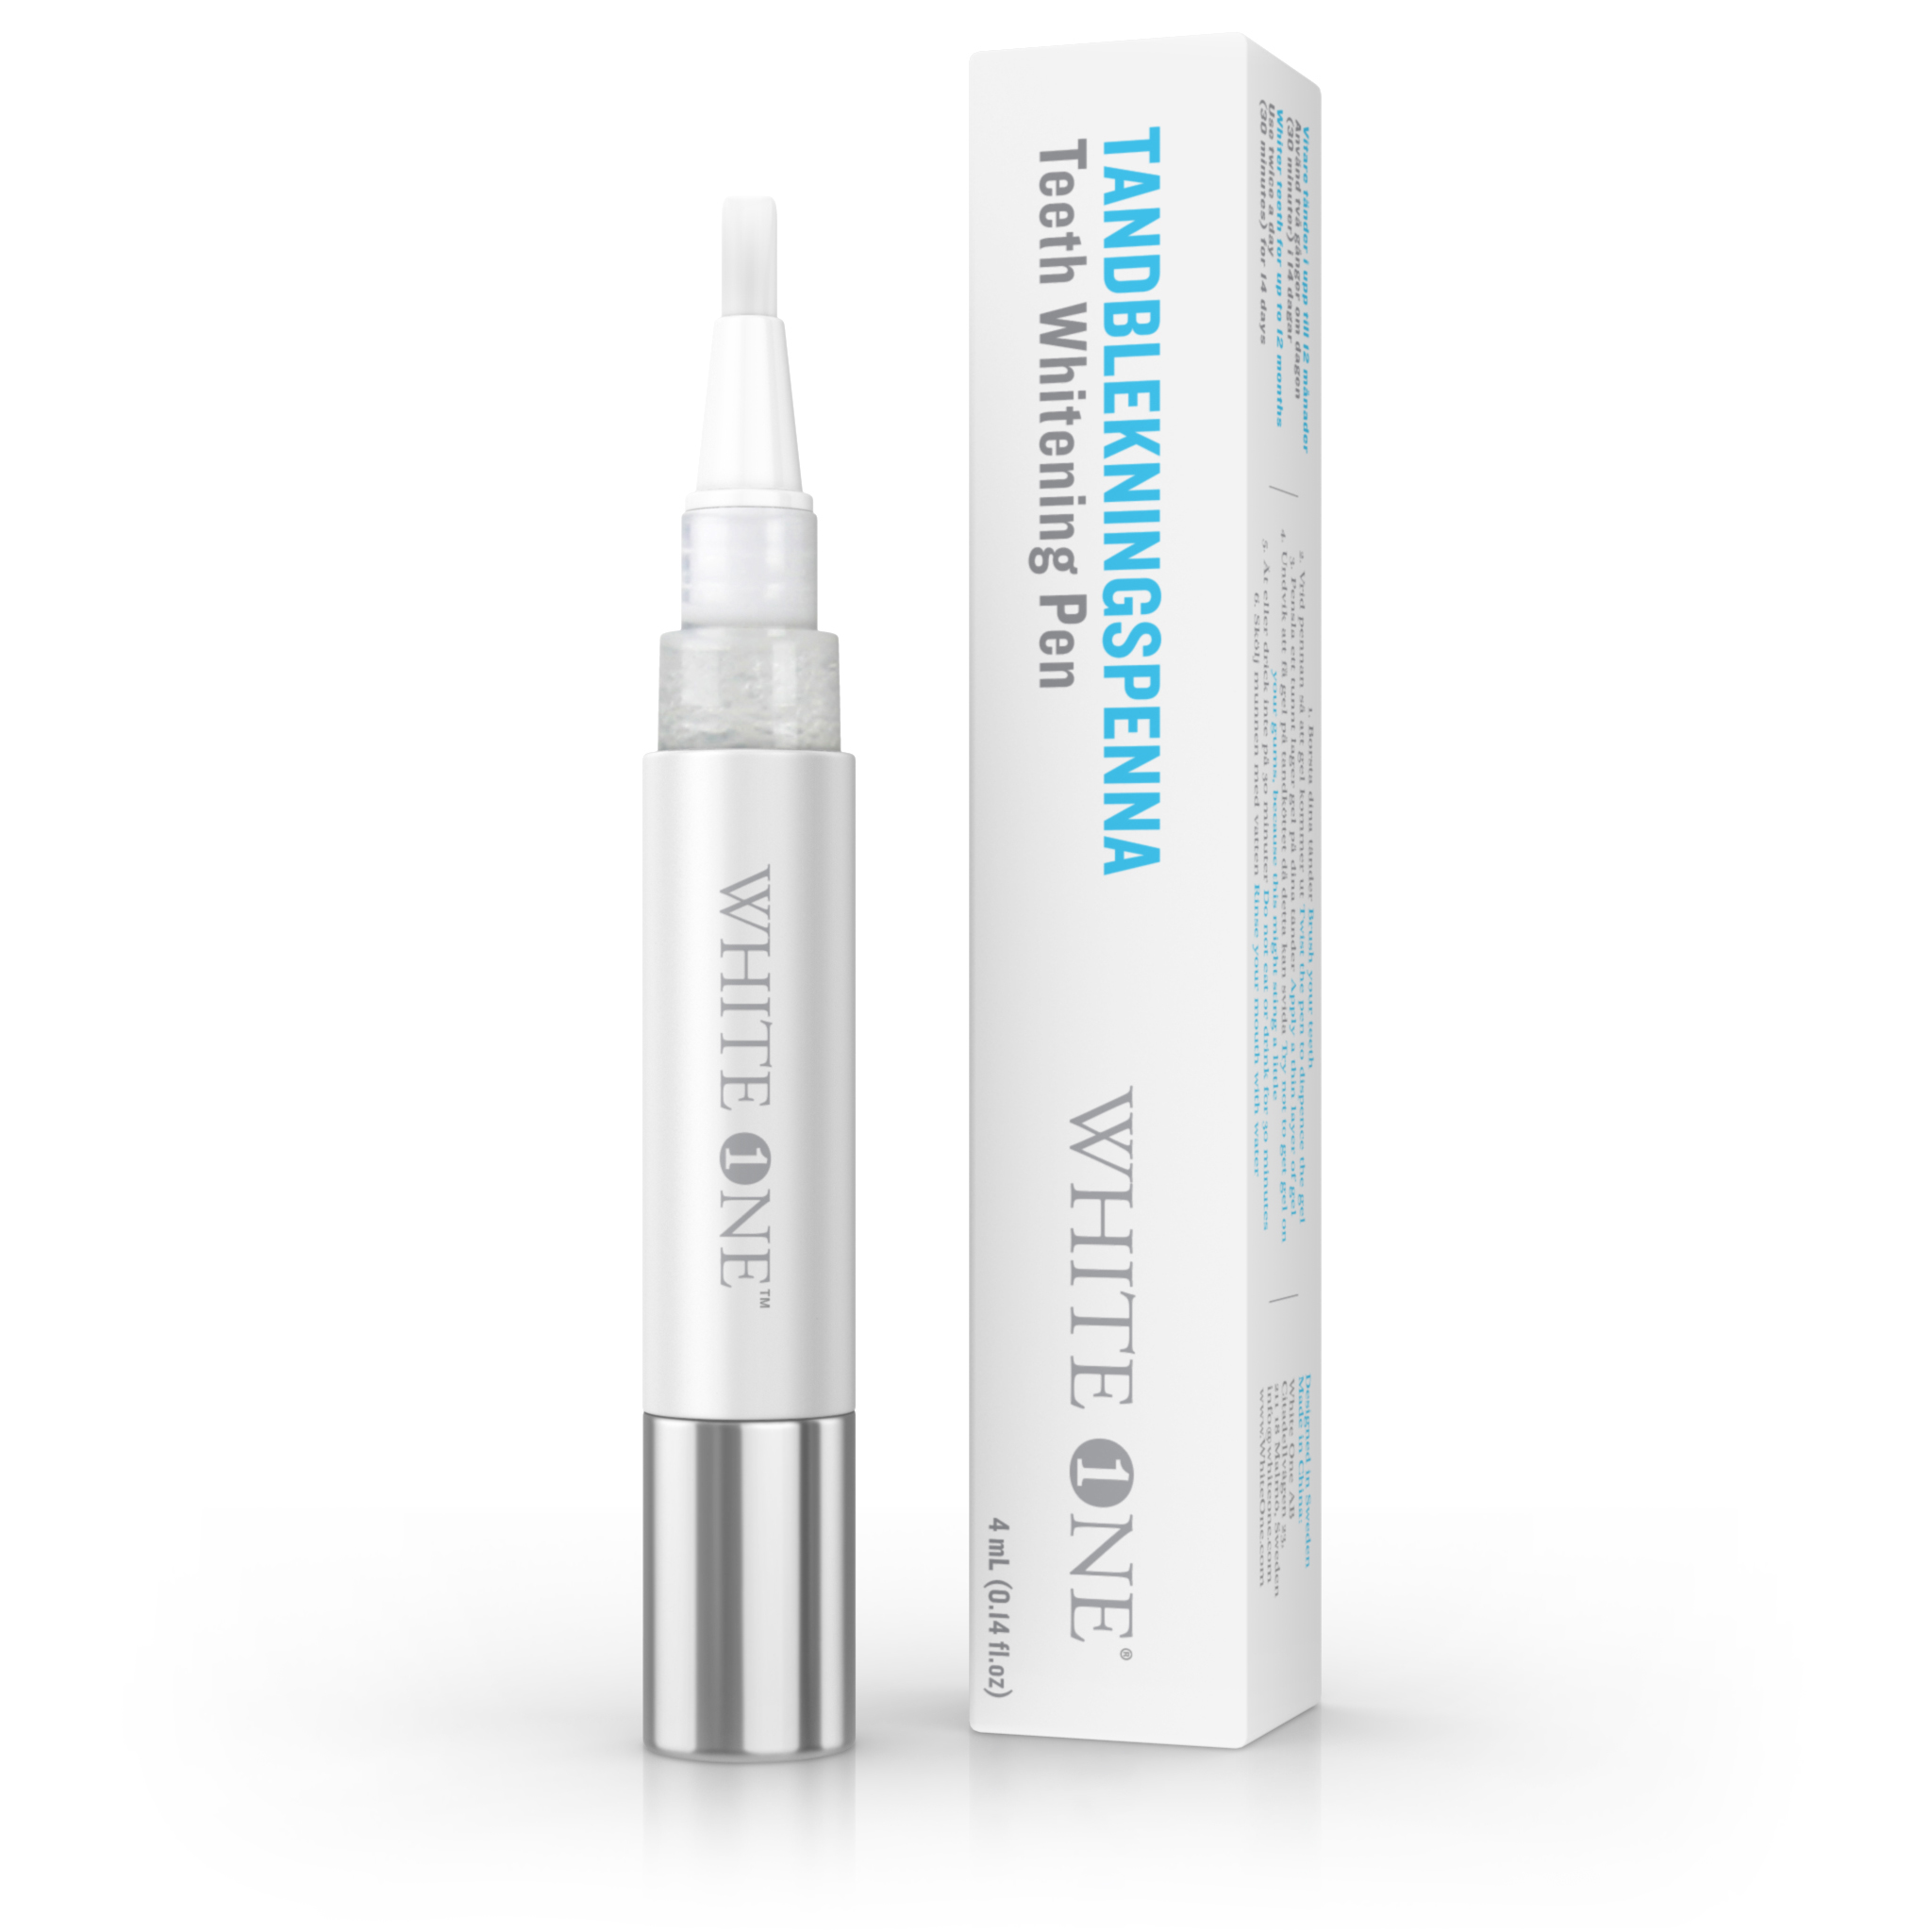 Teeth Whitening Kit to and unbeatable price | Save 20% today!